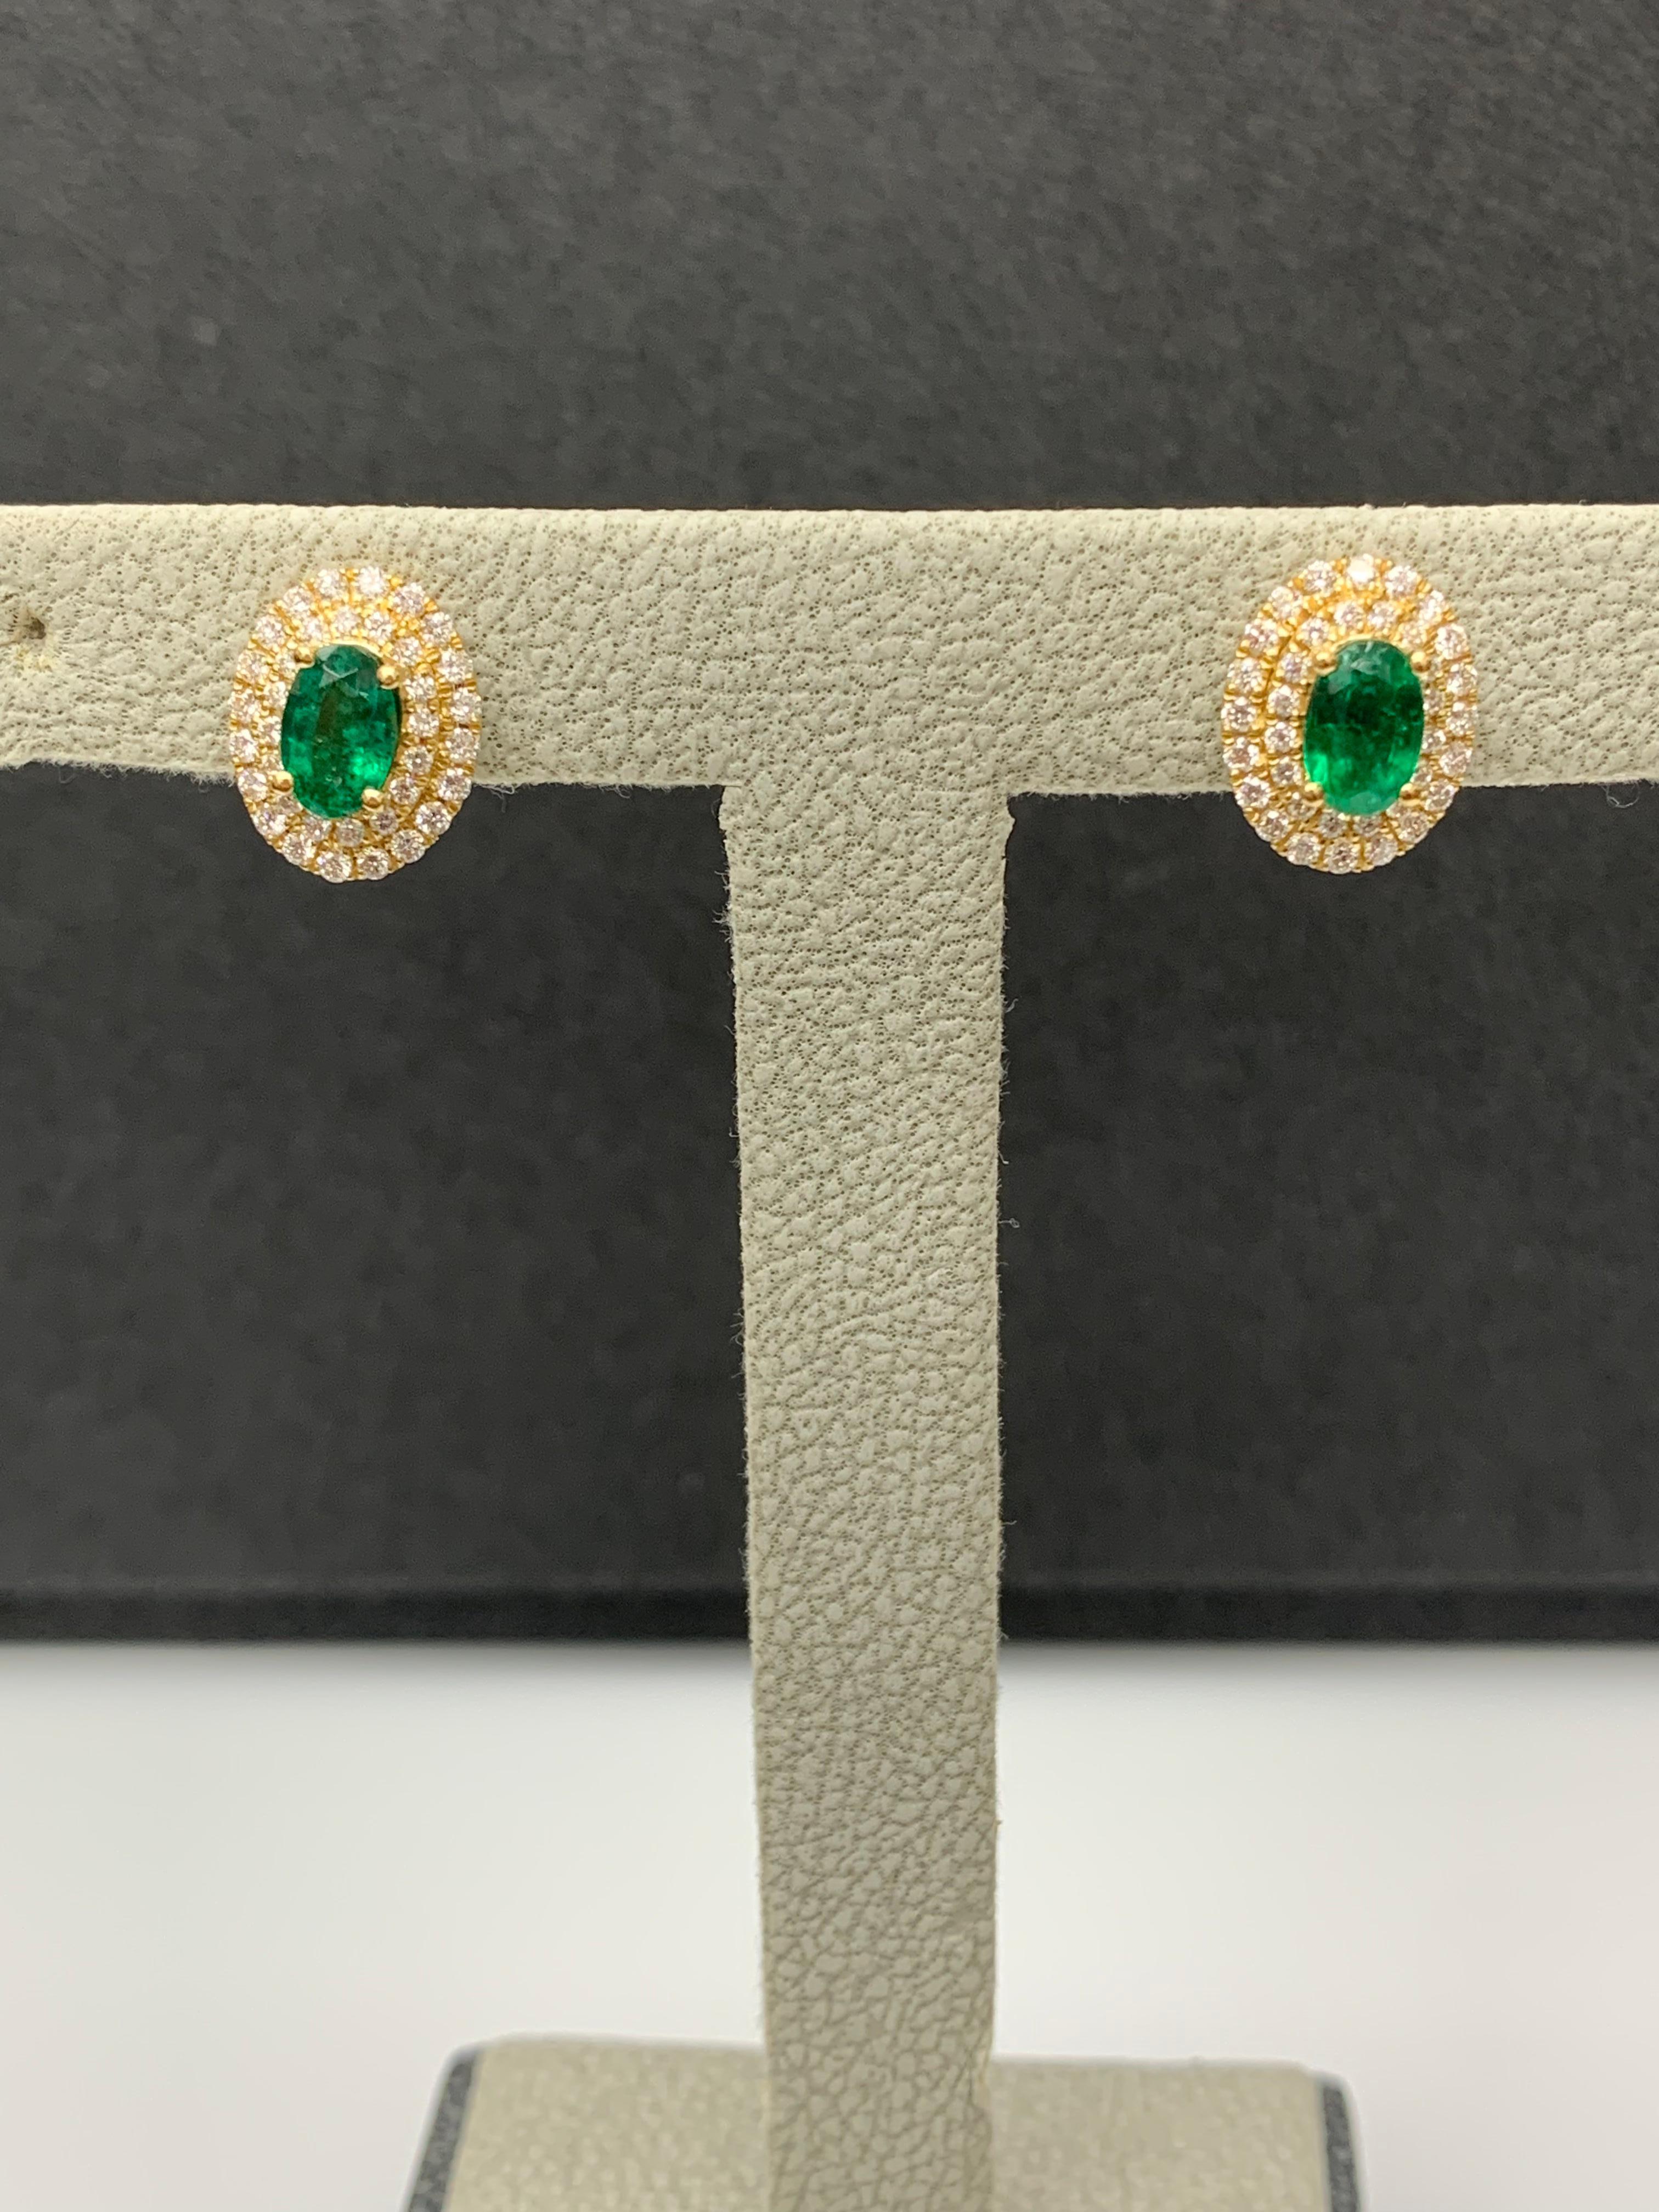 0.89 Carat Oval Cut Emerald and Diamond Stud Earrings in 18K Yellow Gold For Sale 12